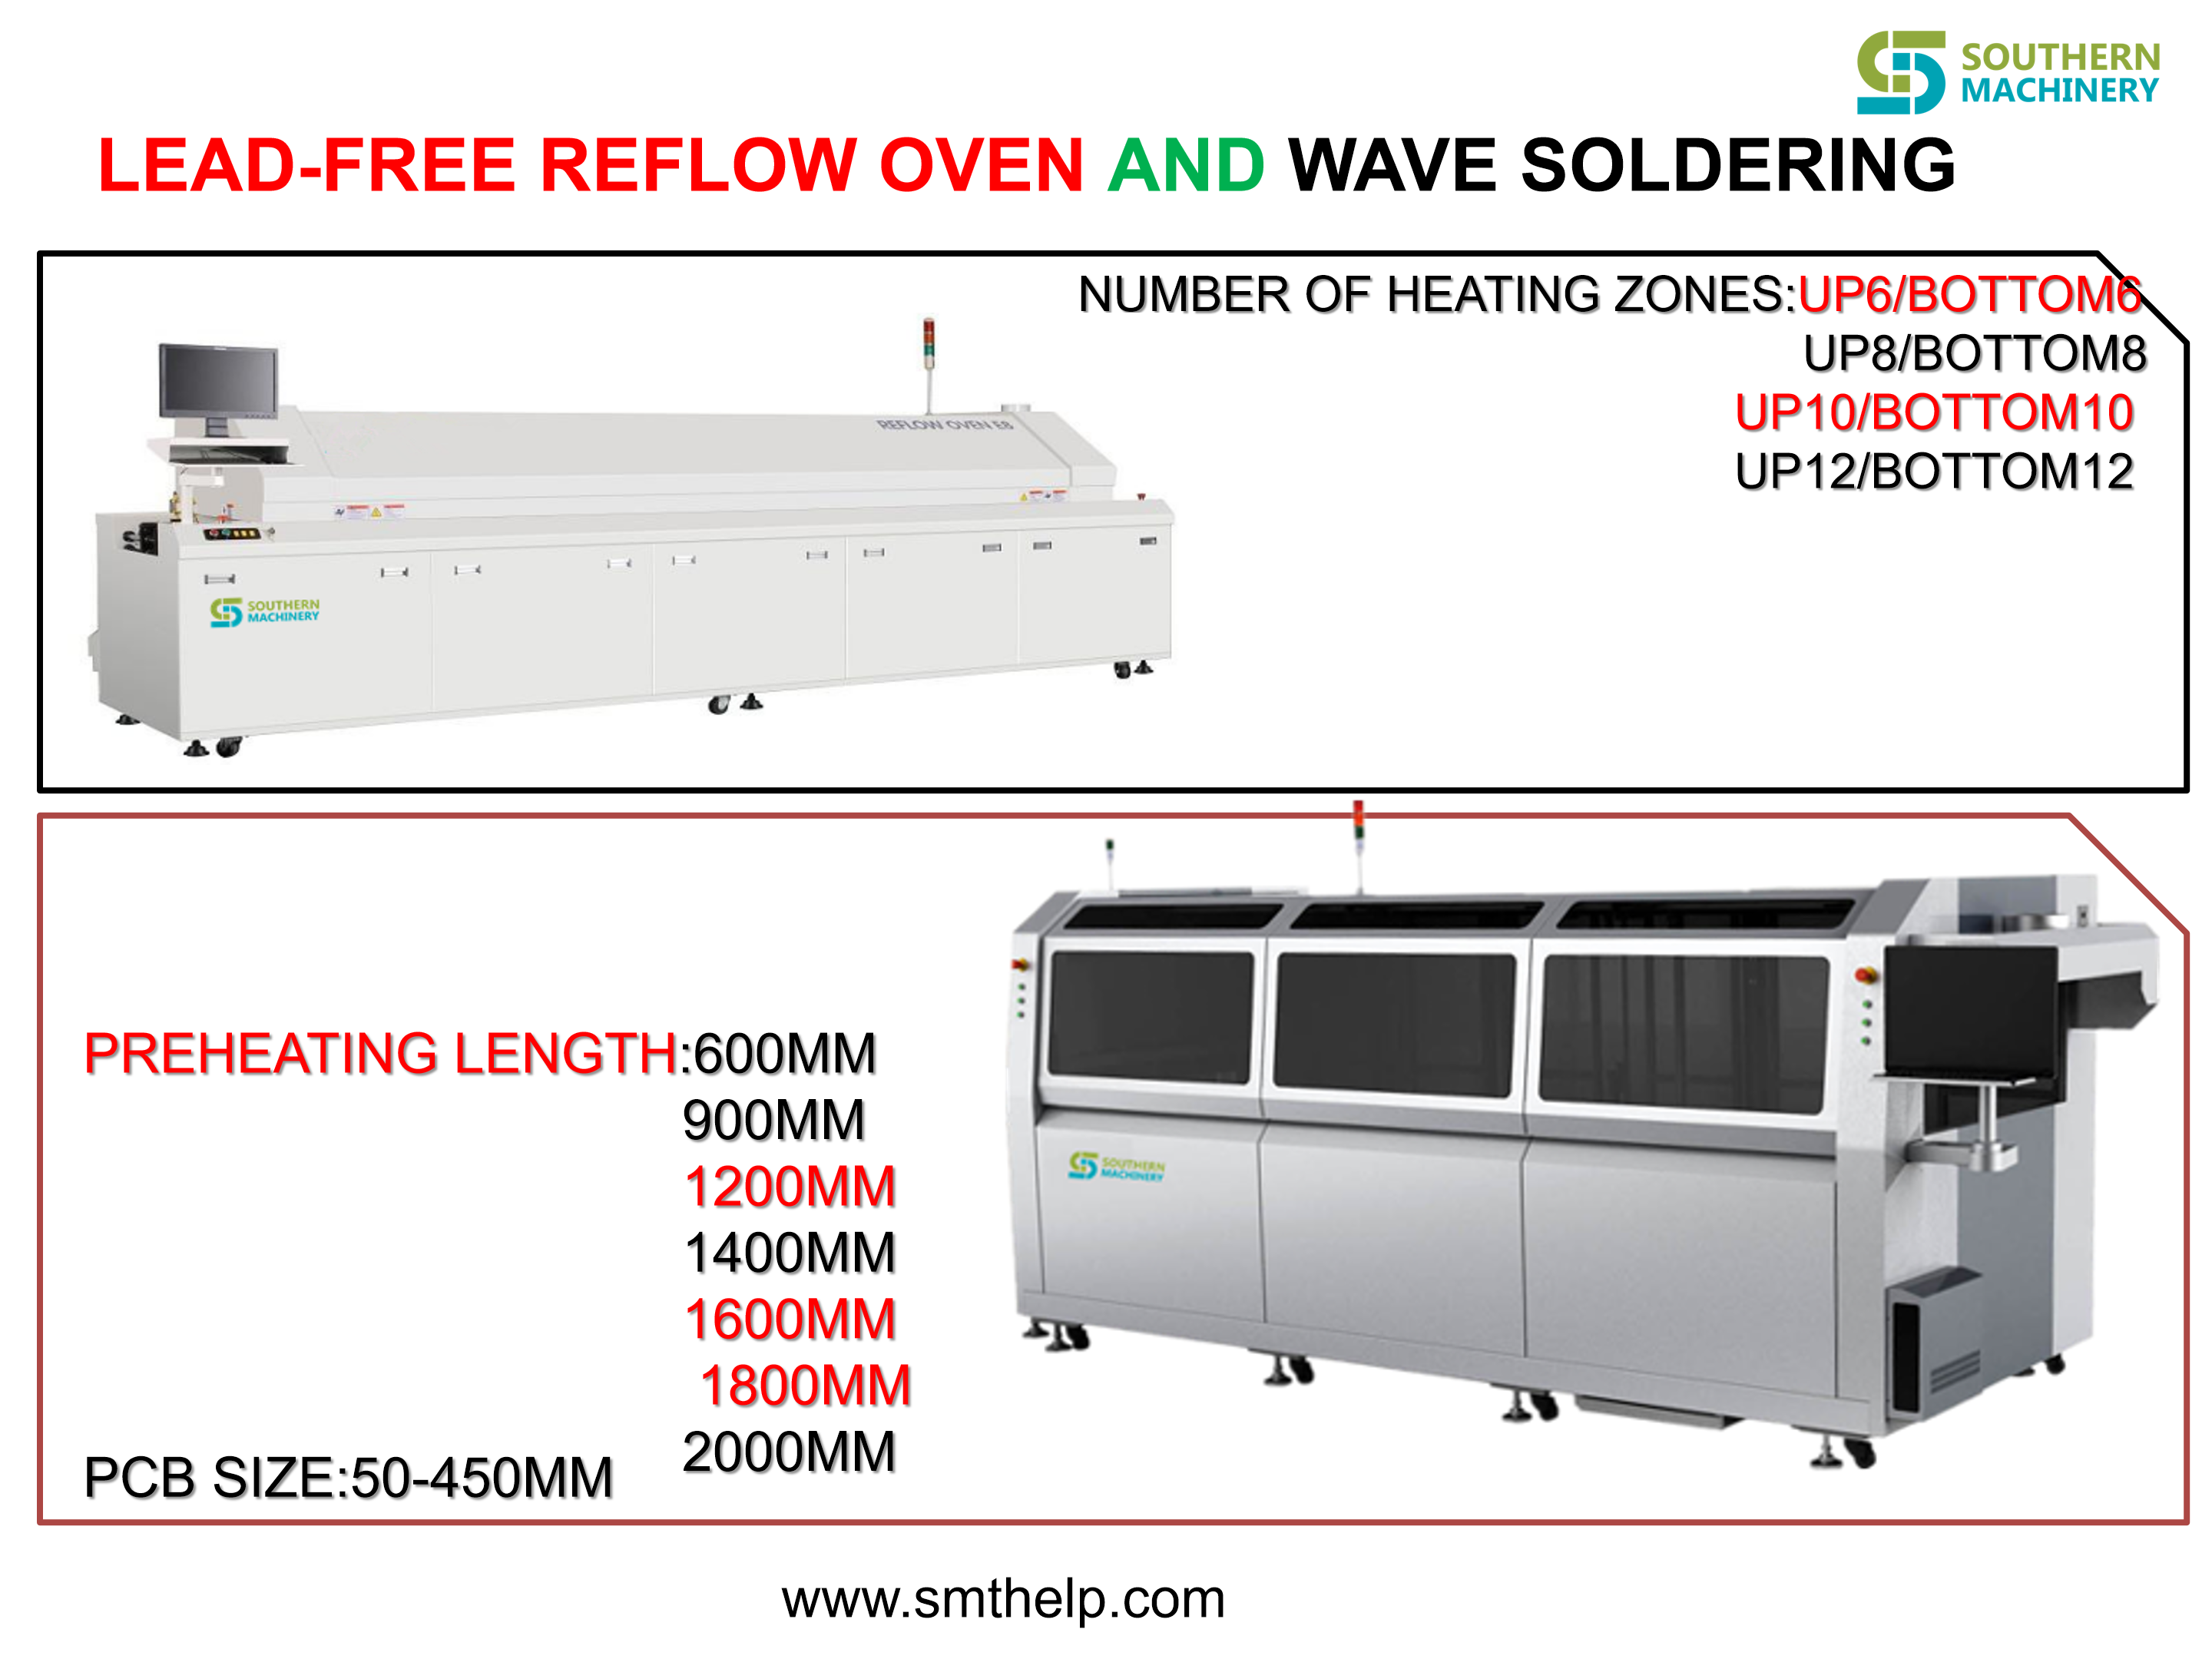 REFLOW OVEN AND WAVE SOLDERING